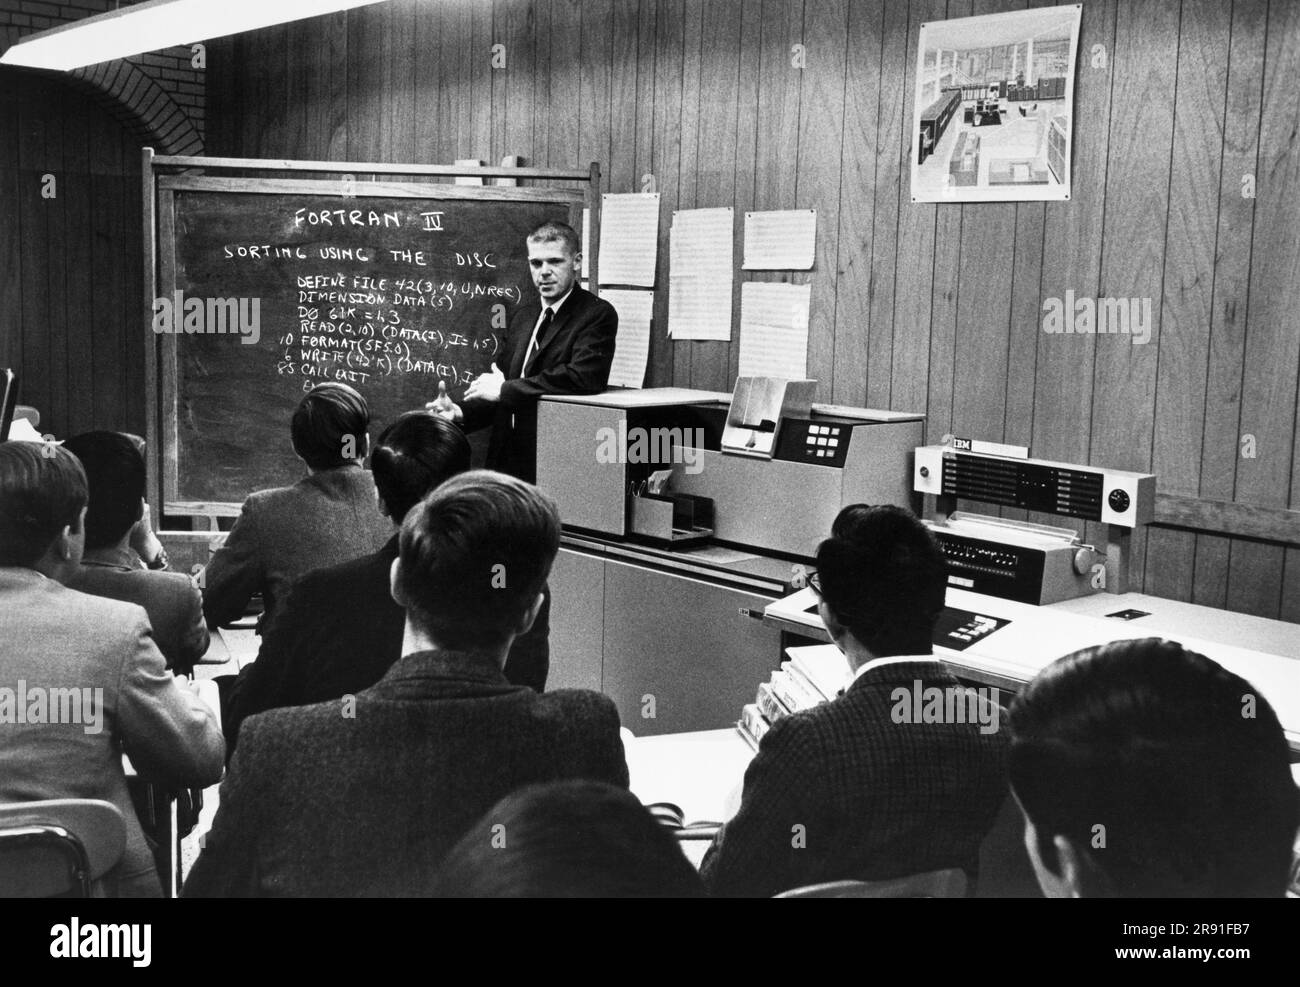 Boston, Massachusetts:  October 4, 1968 An instructor at the Boston Latin School is using an IBM 1130 computer to teach the FORTRAN computer language and programming to students. Stock Photo